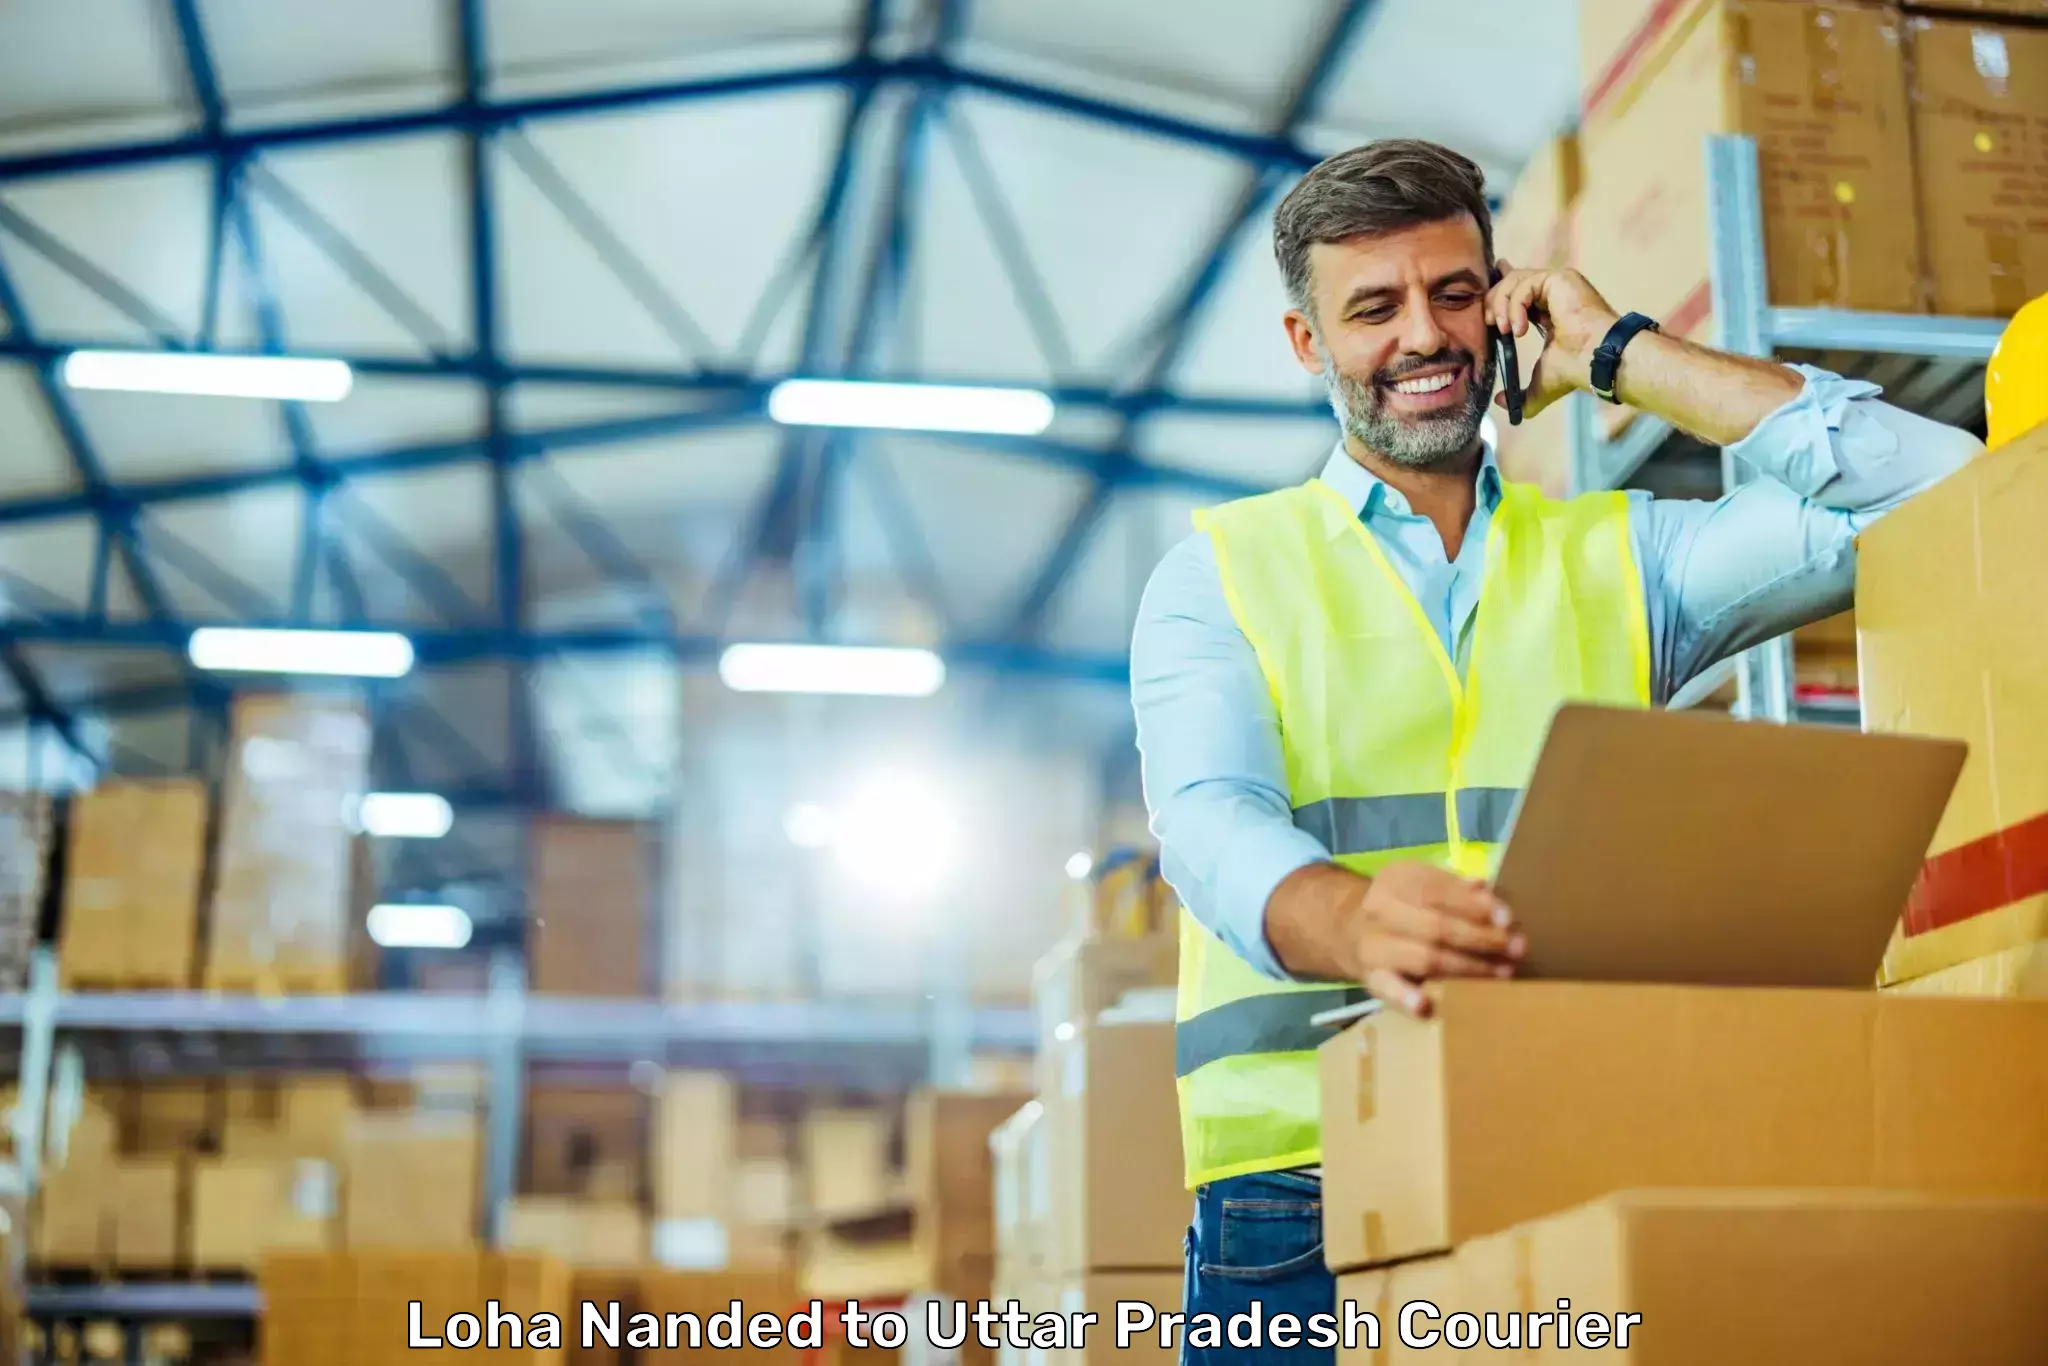 On-call courier service Loha Nanded to Uttar Pradesh